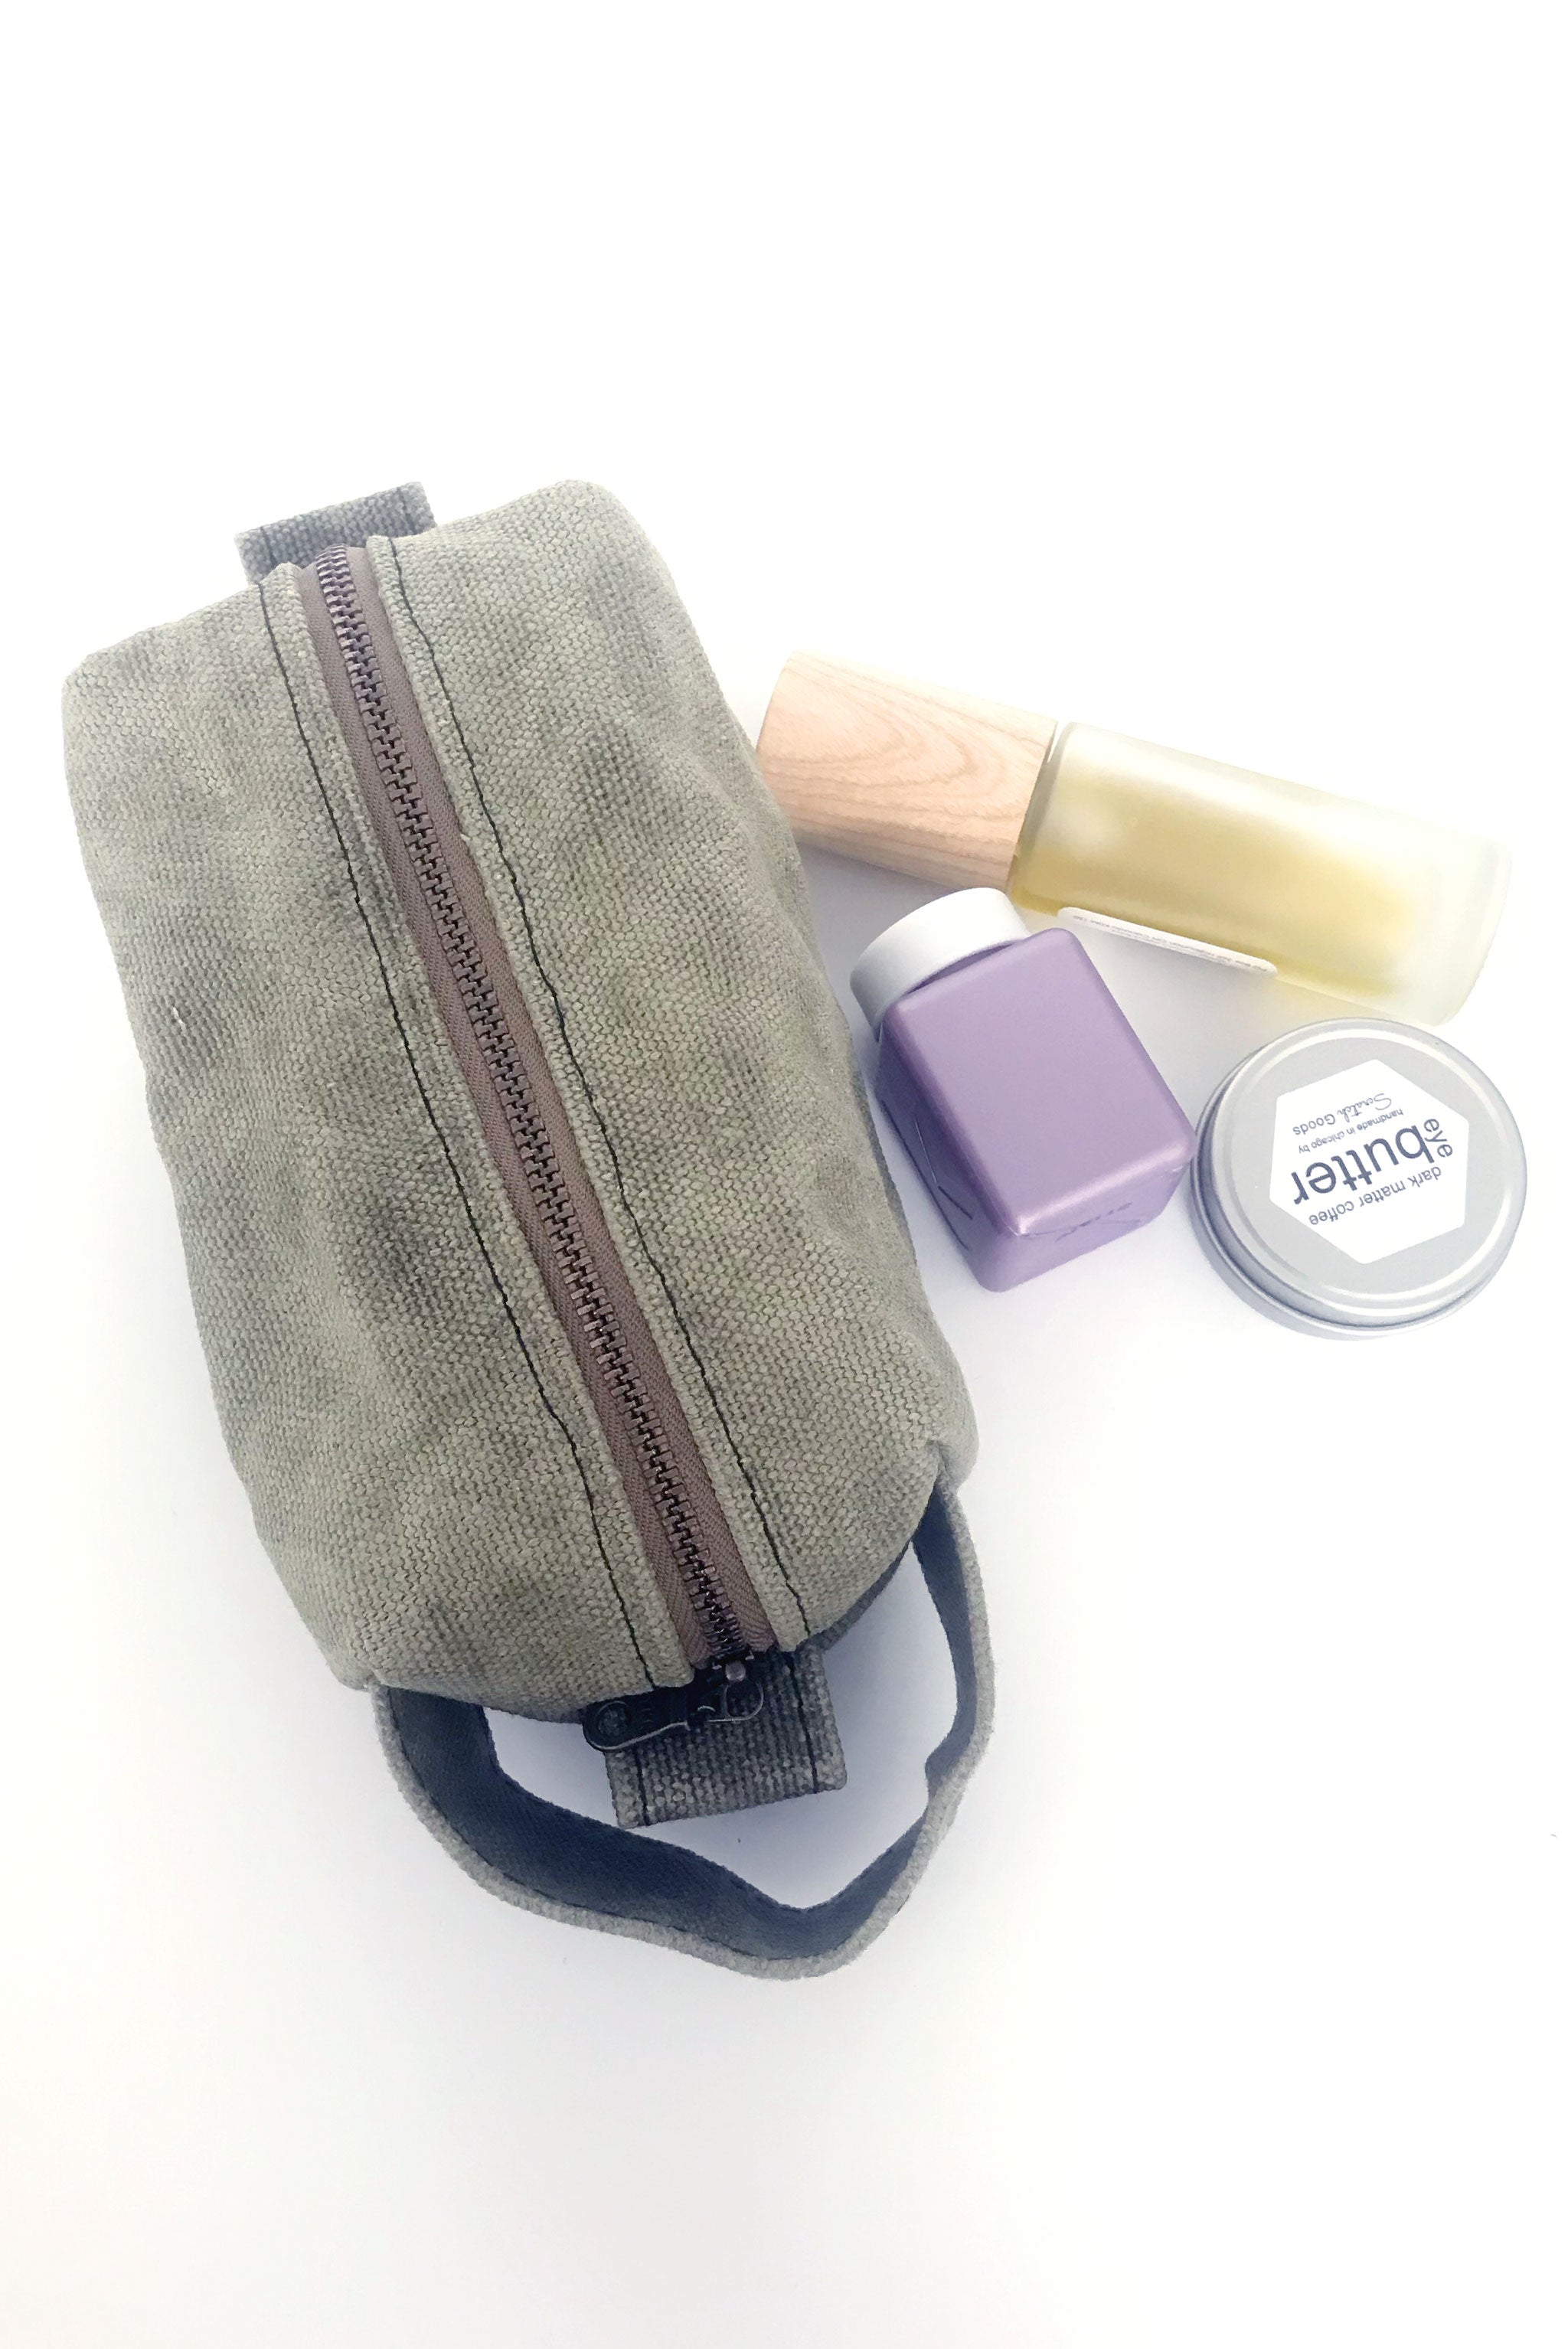 small waxed canvas toiletry bag with handle and brass zipper. The bag is closed and sits next to three small bottles and containers. The bag is sage green. 